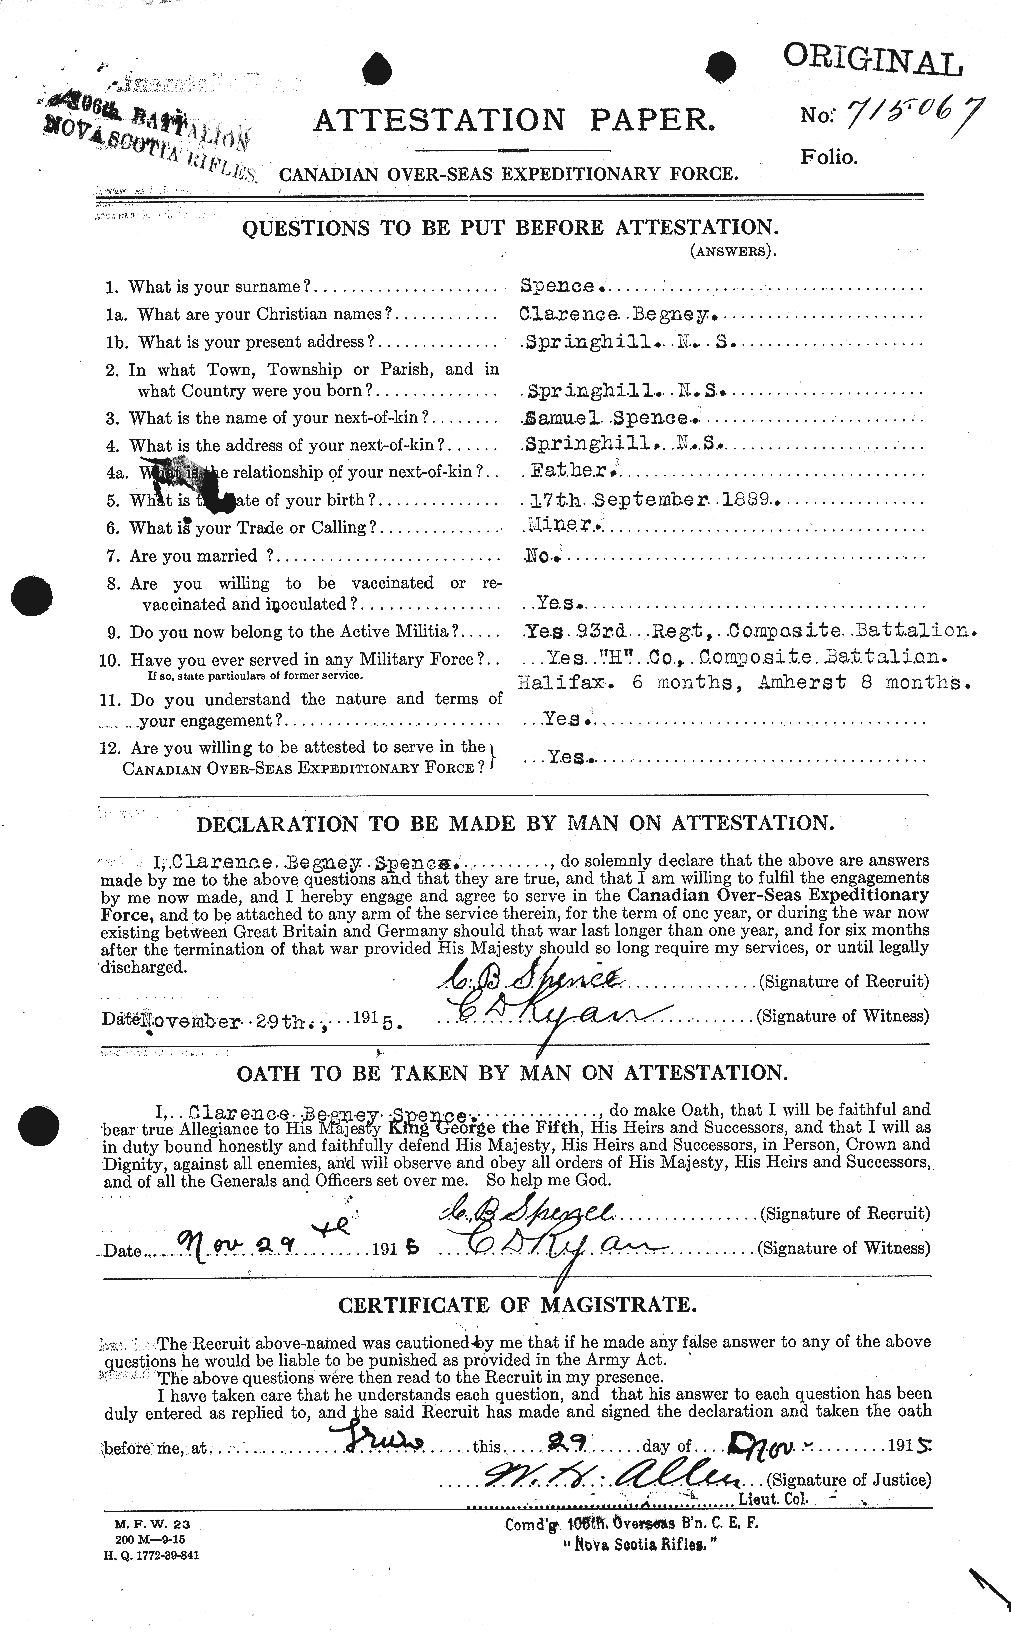 Personnel Records of the First World War - CEF 109564a